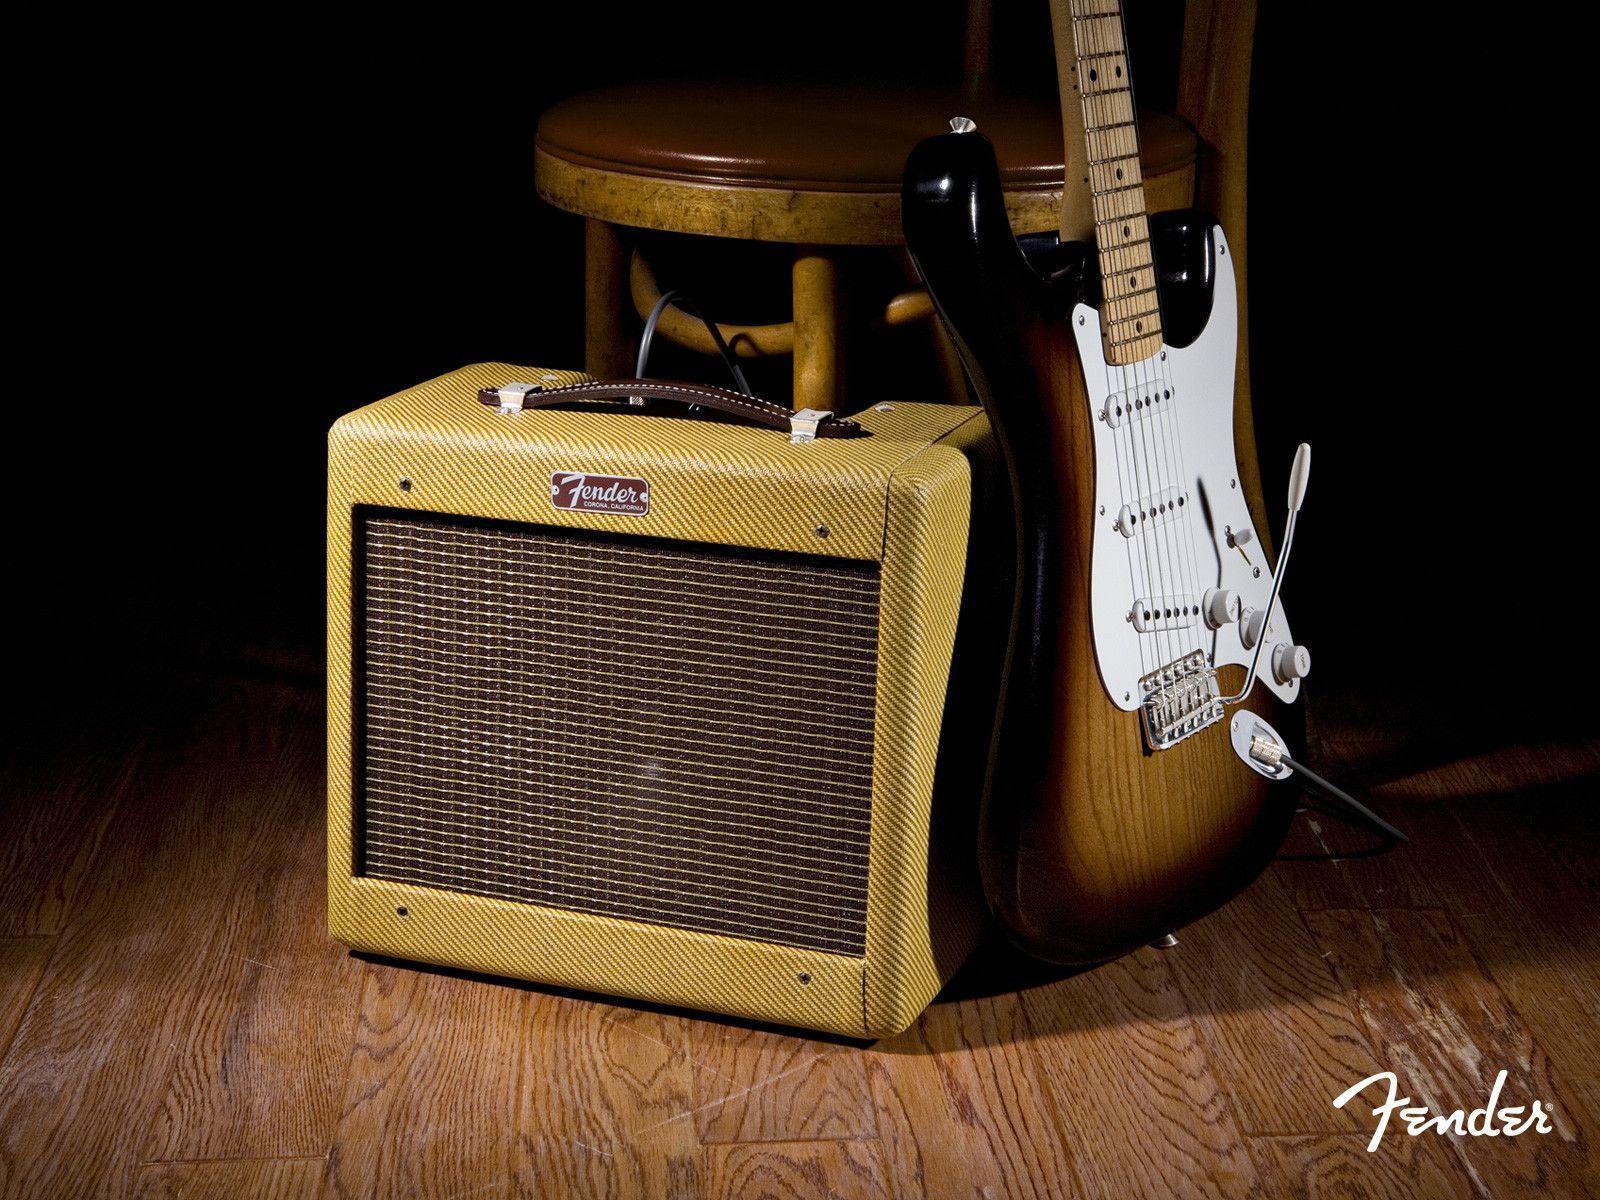 Fender Stratocaster Wallpapers - Wallpaper Cave